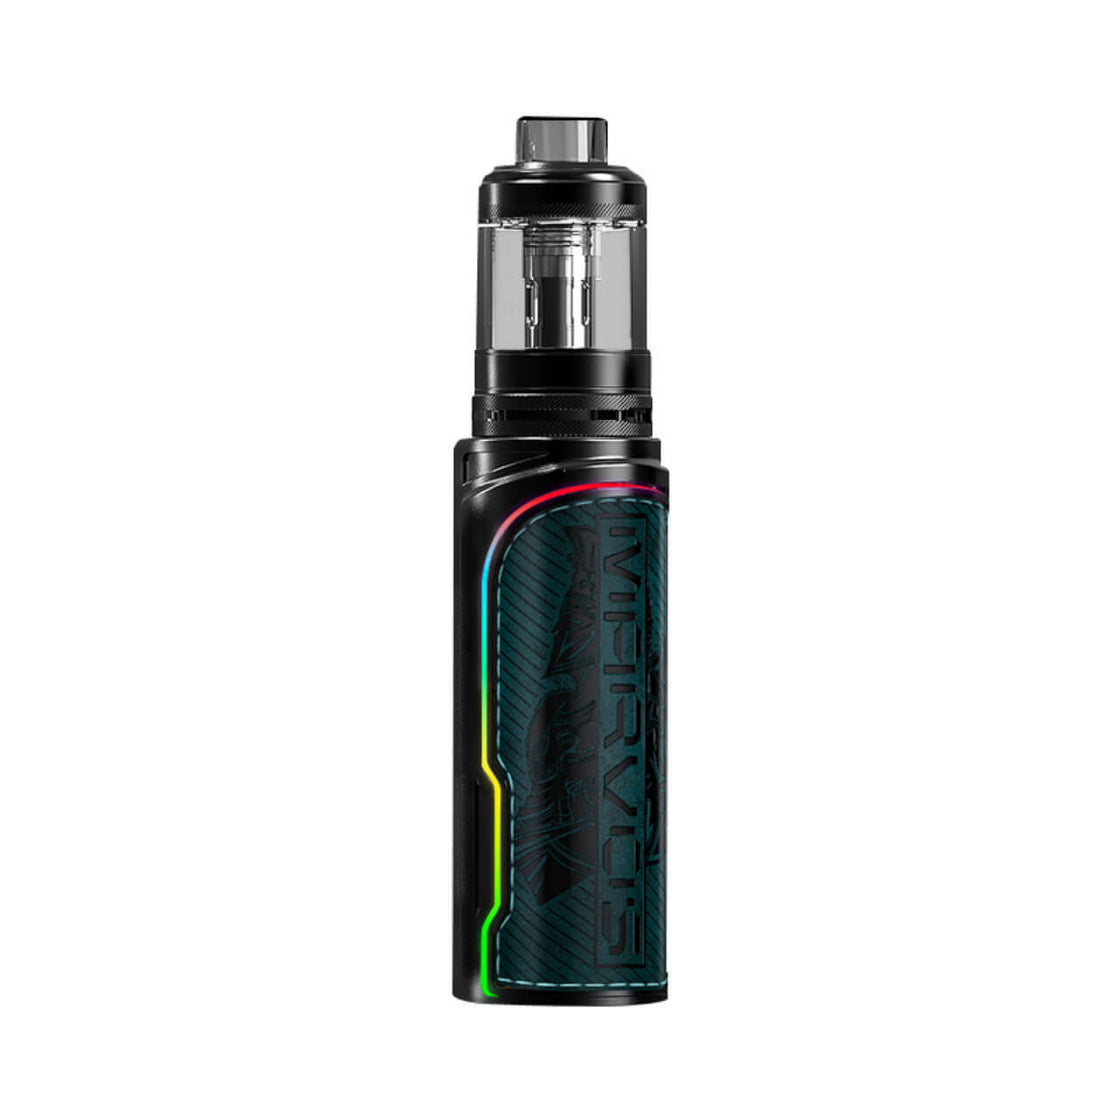 Marvos X 100W 18650 Pod System Starter Kit With Refillable 5ML CRC Pod By Freemax